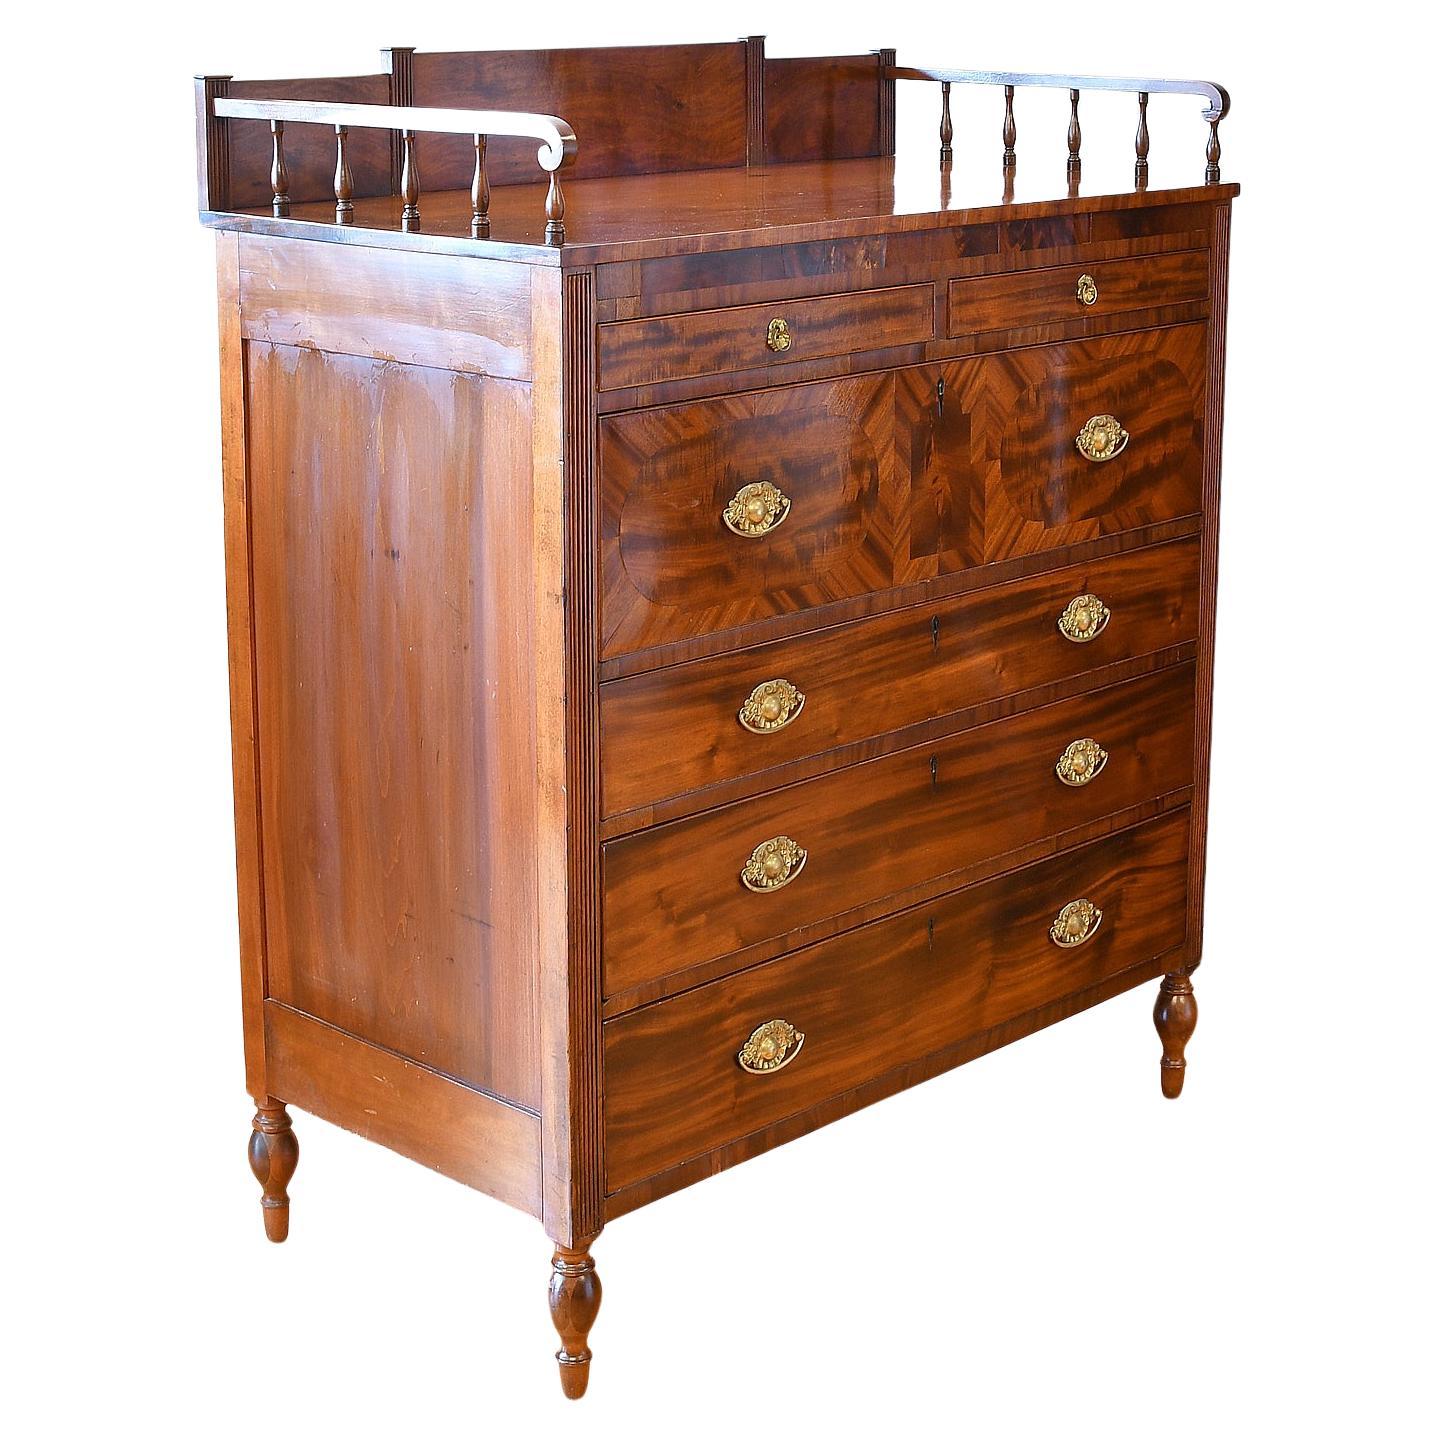 A lovely American Sheraton chest of drawers in mahogany from New York,  circa 1815. Veneer work on second drawer is reminiscent of the work of Michael Allison. Chest features an original gallery in solid mahogany with two small drawers over four